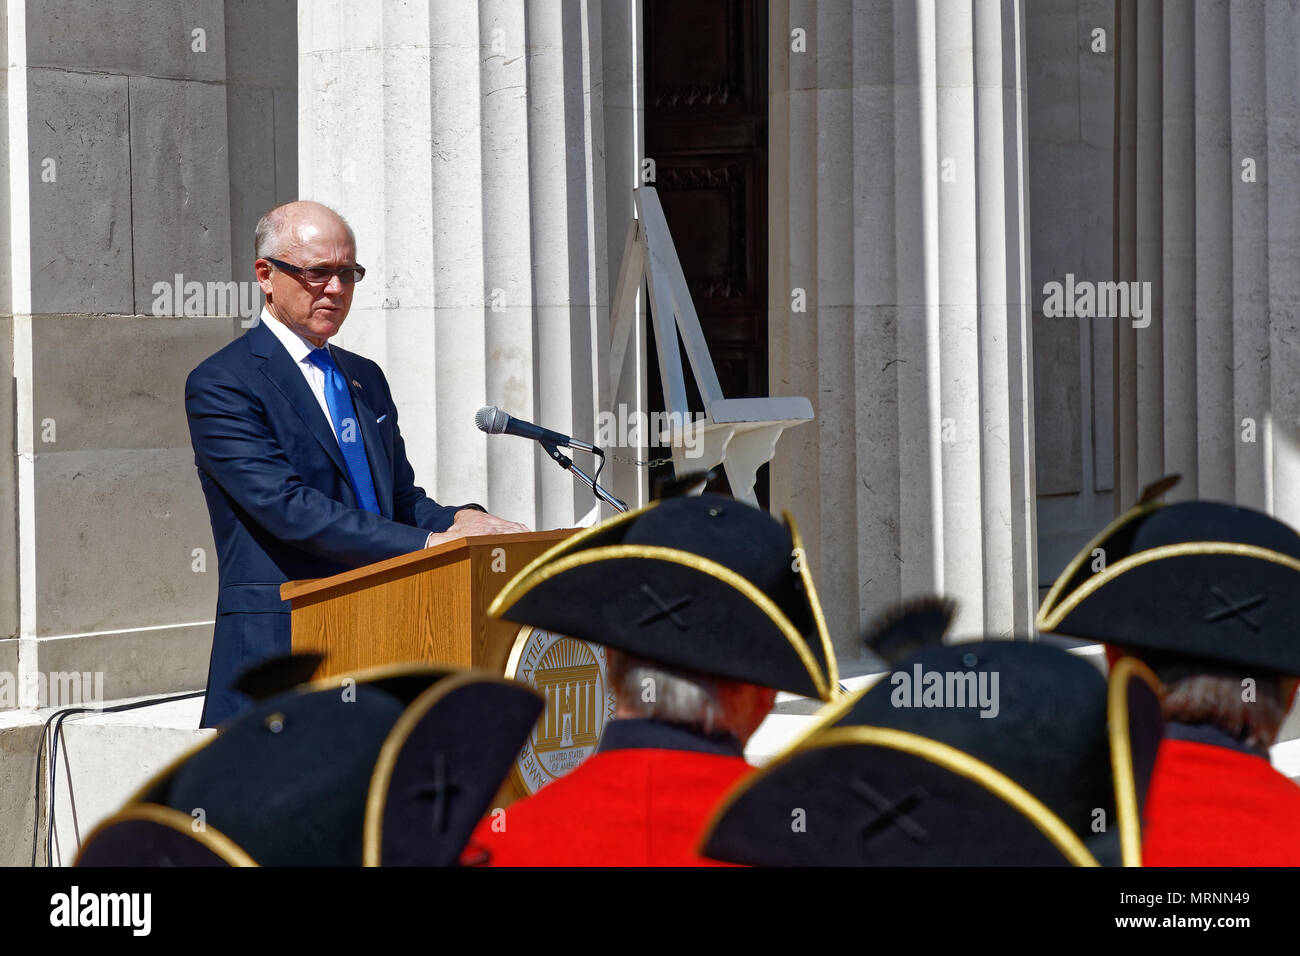 Brookwood American Military Cemetery, Surrey, UKBrookwood American Military Cemetery, Surrey, UK. Sun 27th May 2018 Brookwood American Cemetery, Surrey UK. Ambassador Johnson's address at the Memorial Day Ceremony. Credit: wyrdlight/Alamy Live News Stock Photo